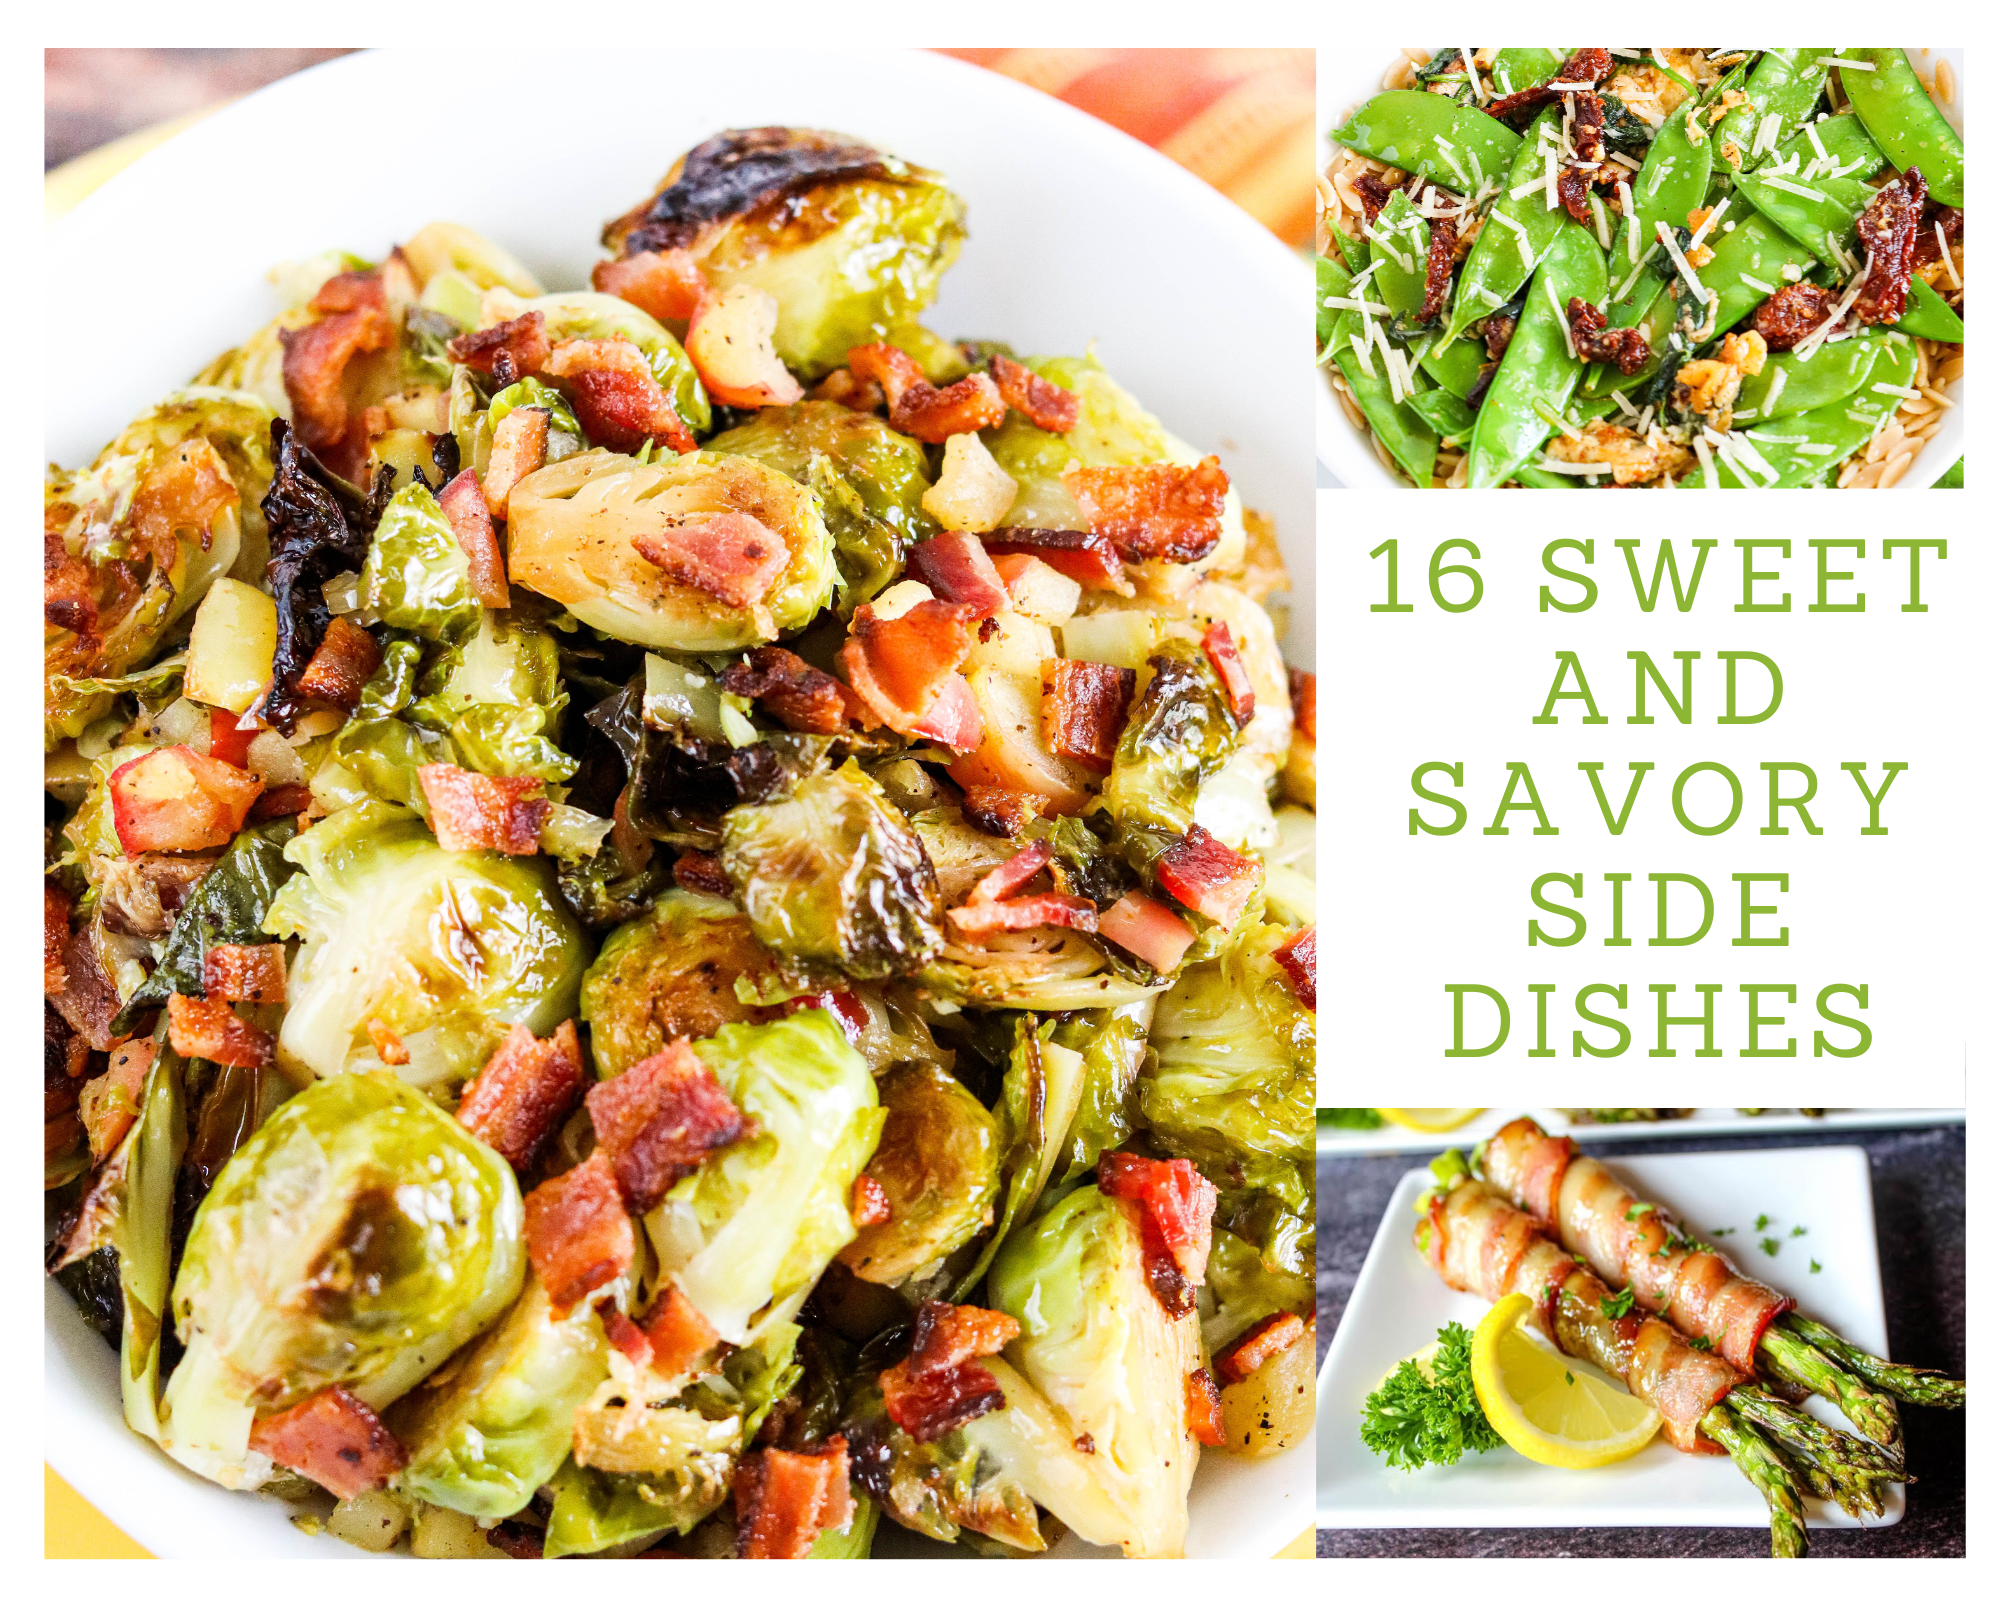 16 Sweet and Savory Side Dishes